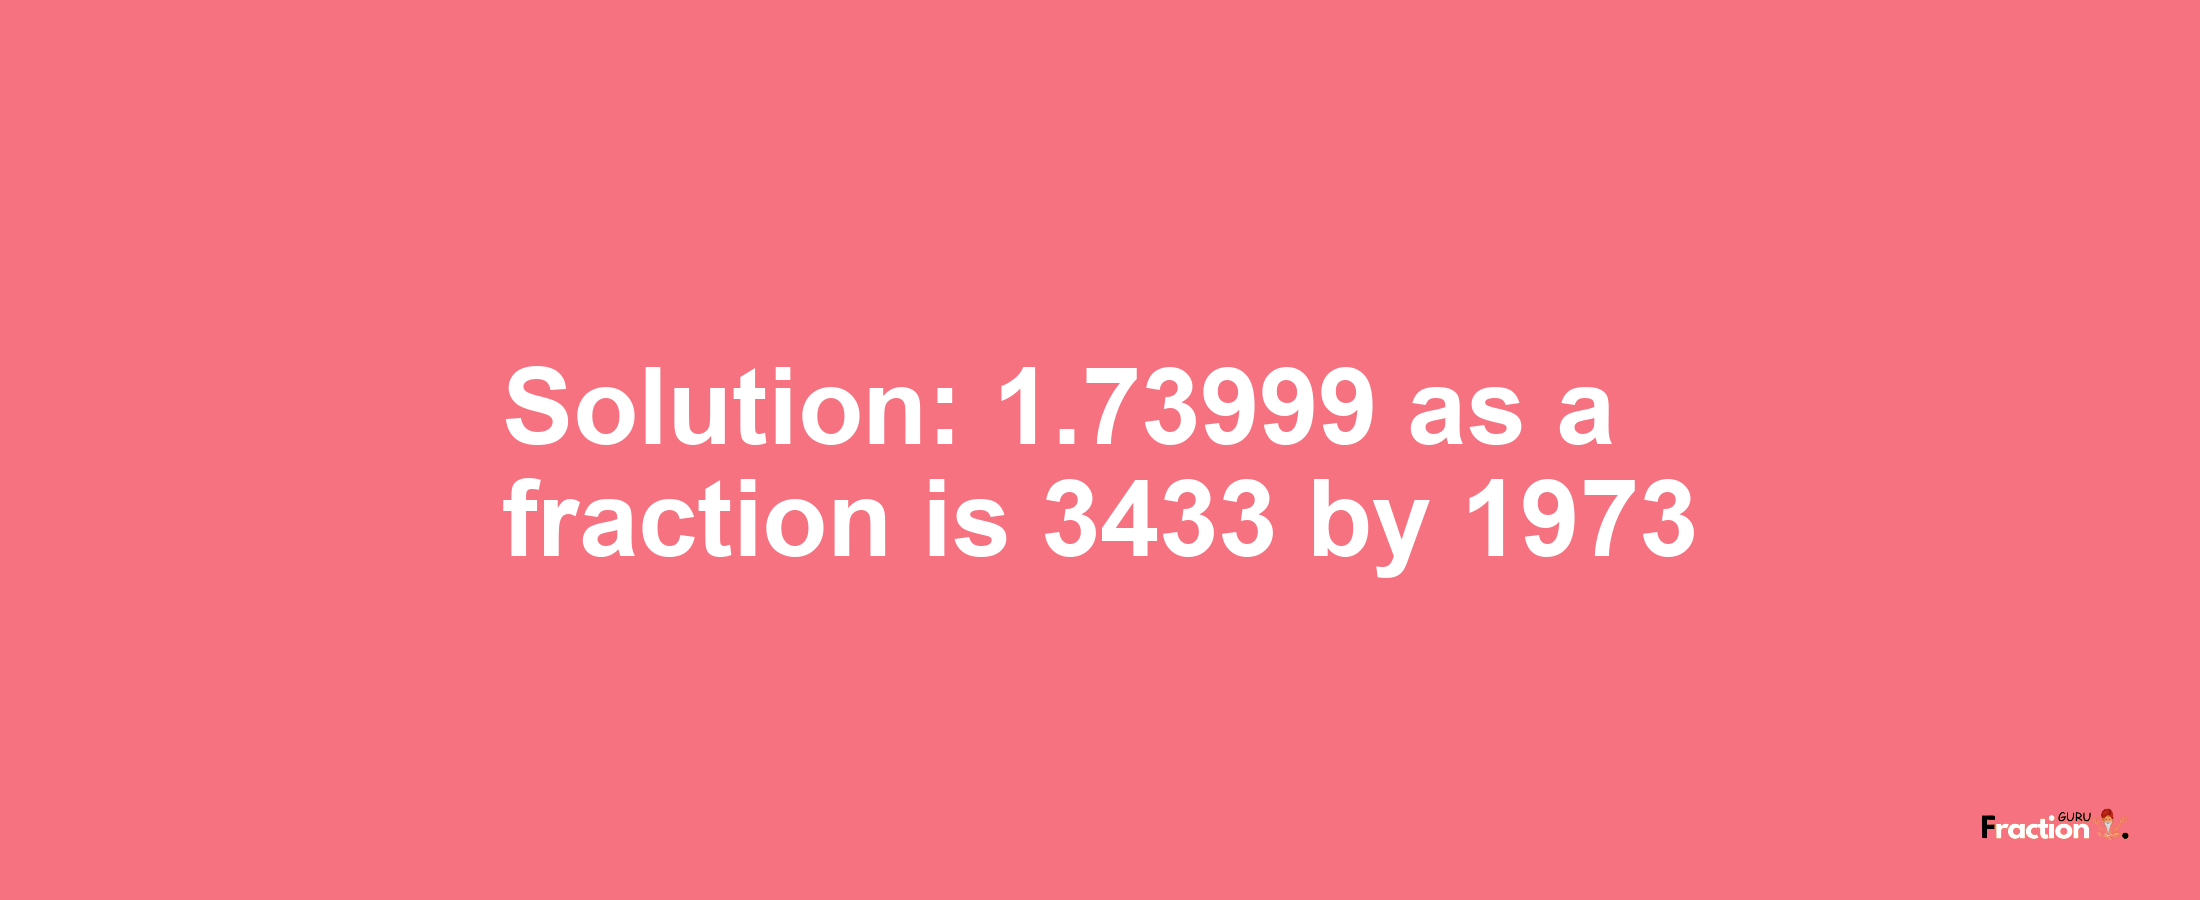 Solution:1.73999 as a fraction is 3433/1973